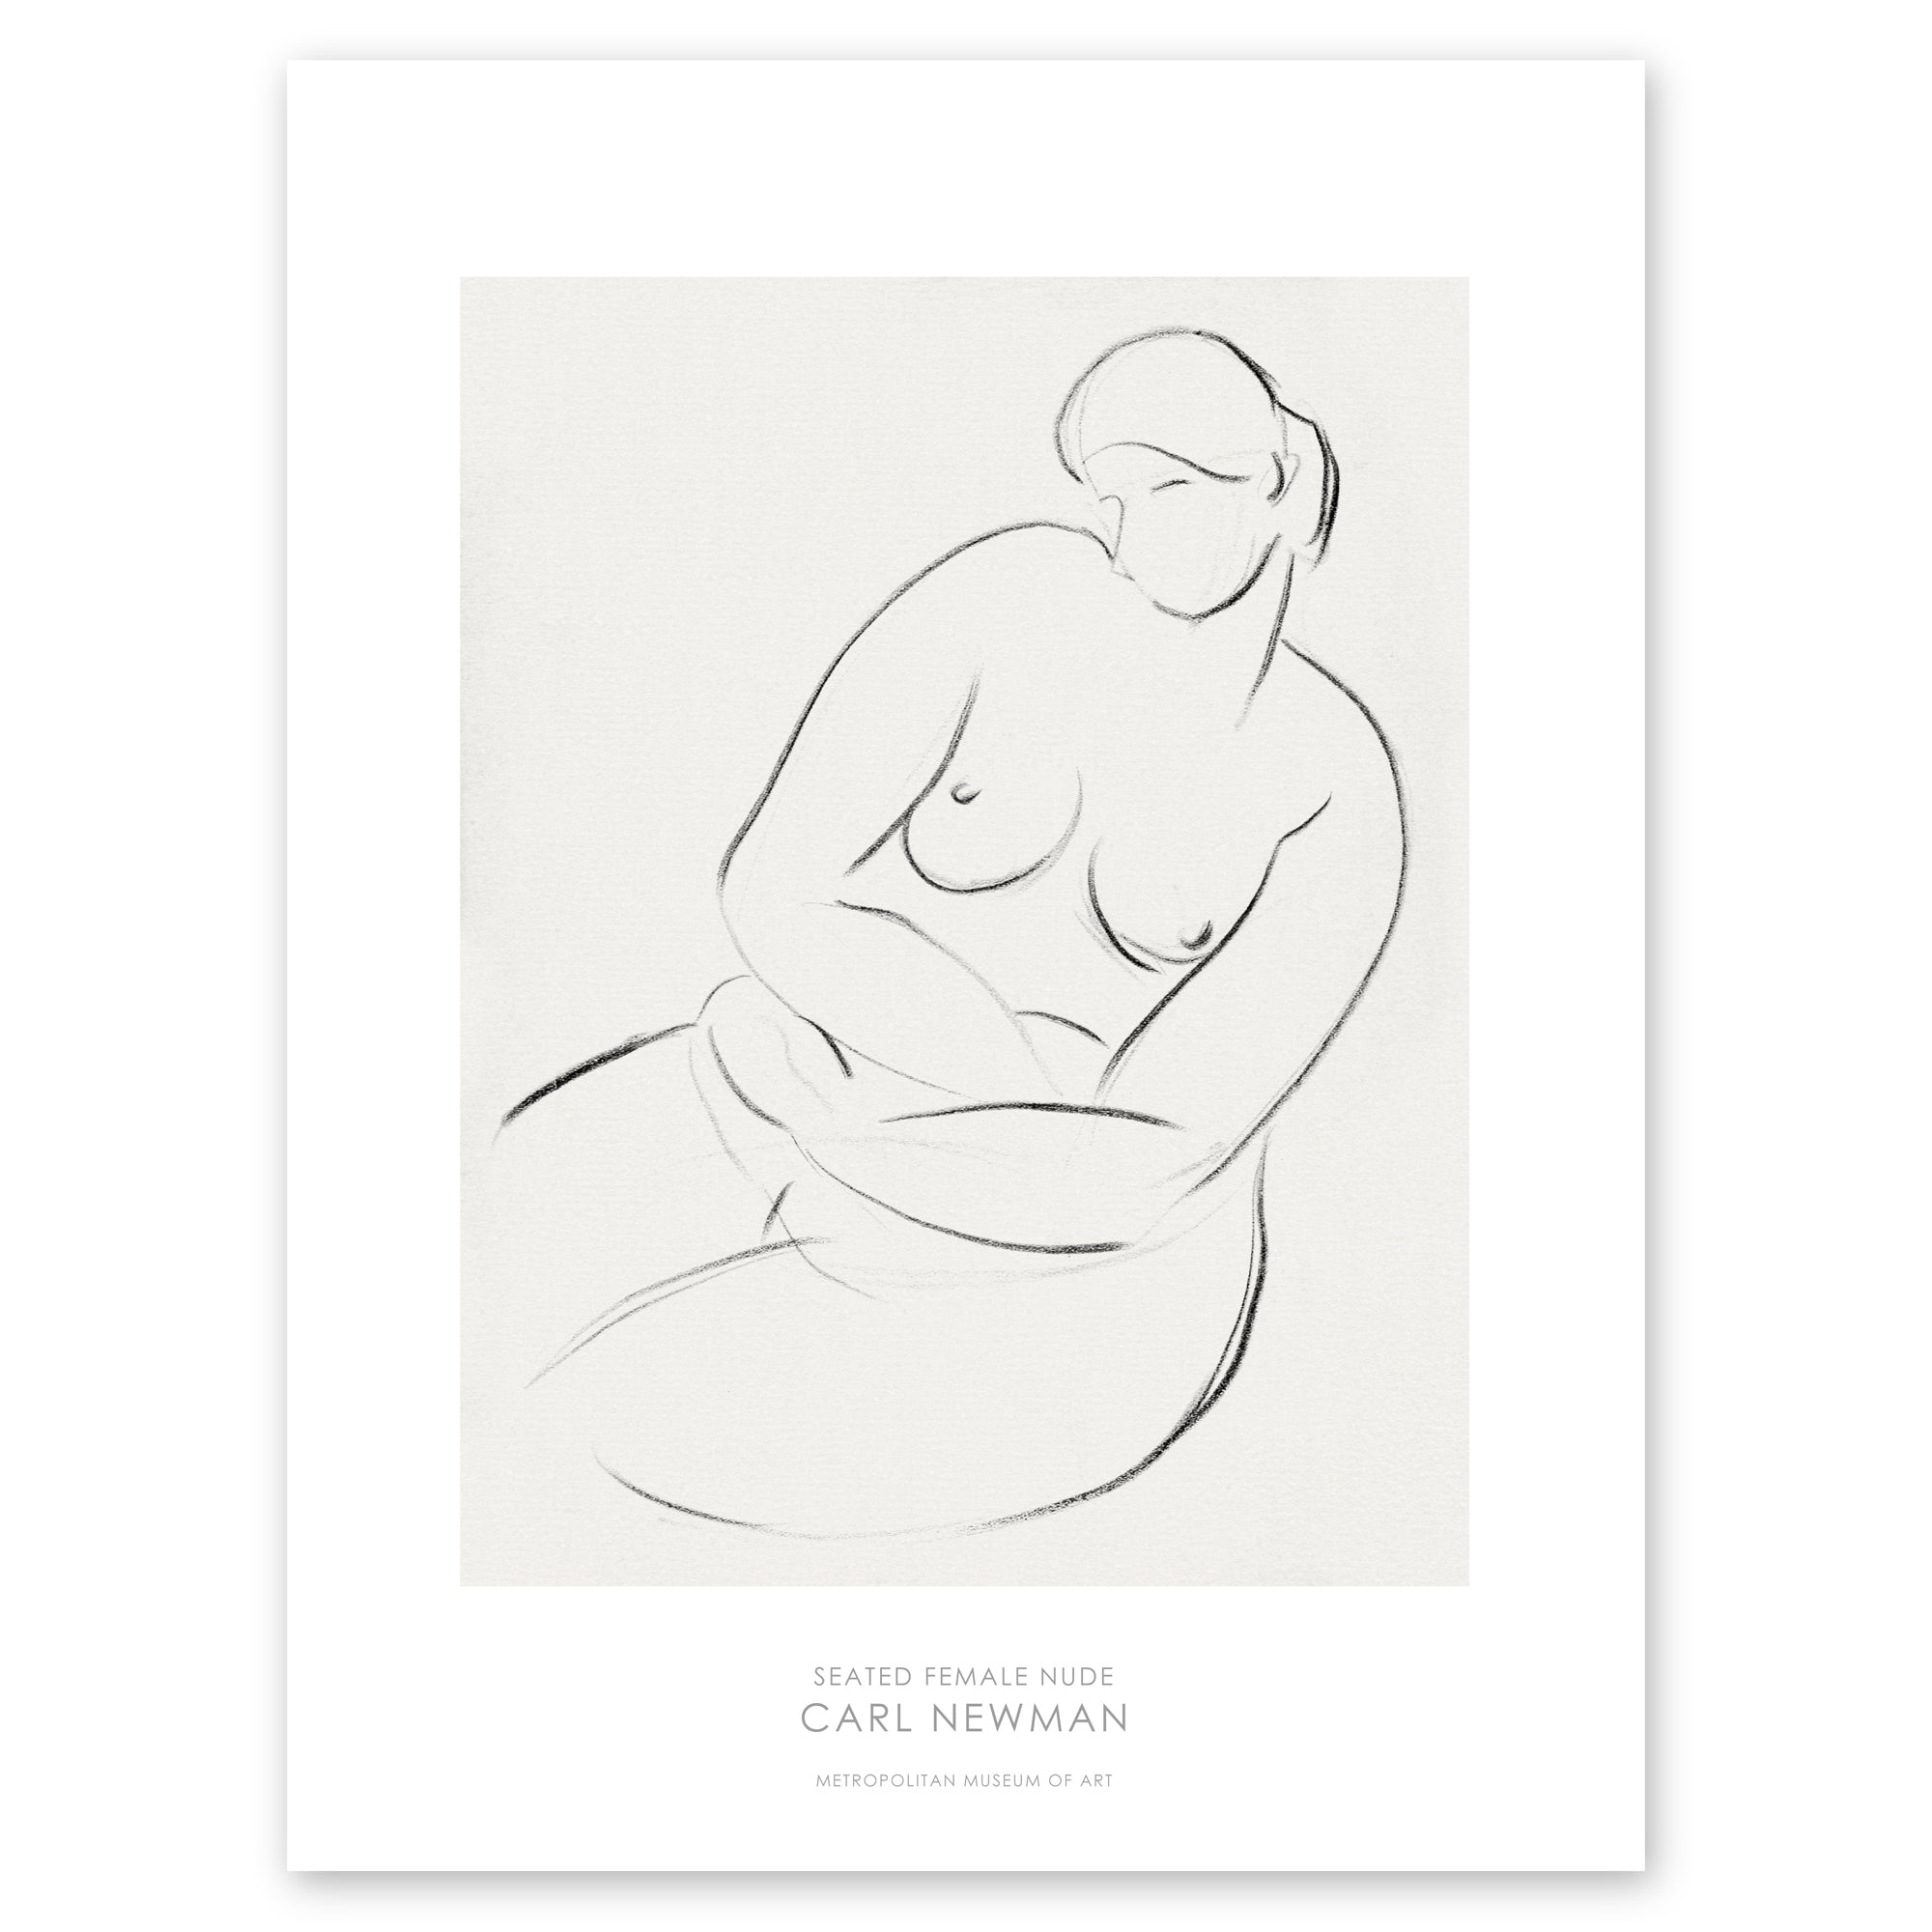 Poster. Charcoal drawing by Car Newman depicting a nude sitting female.